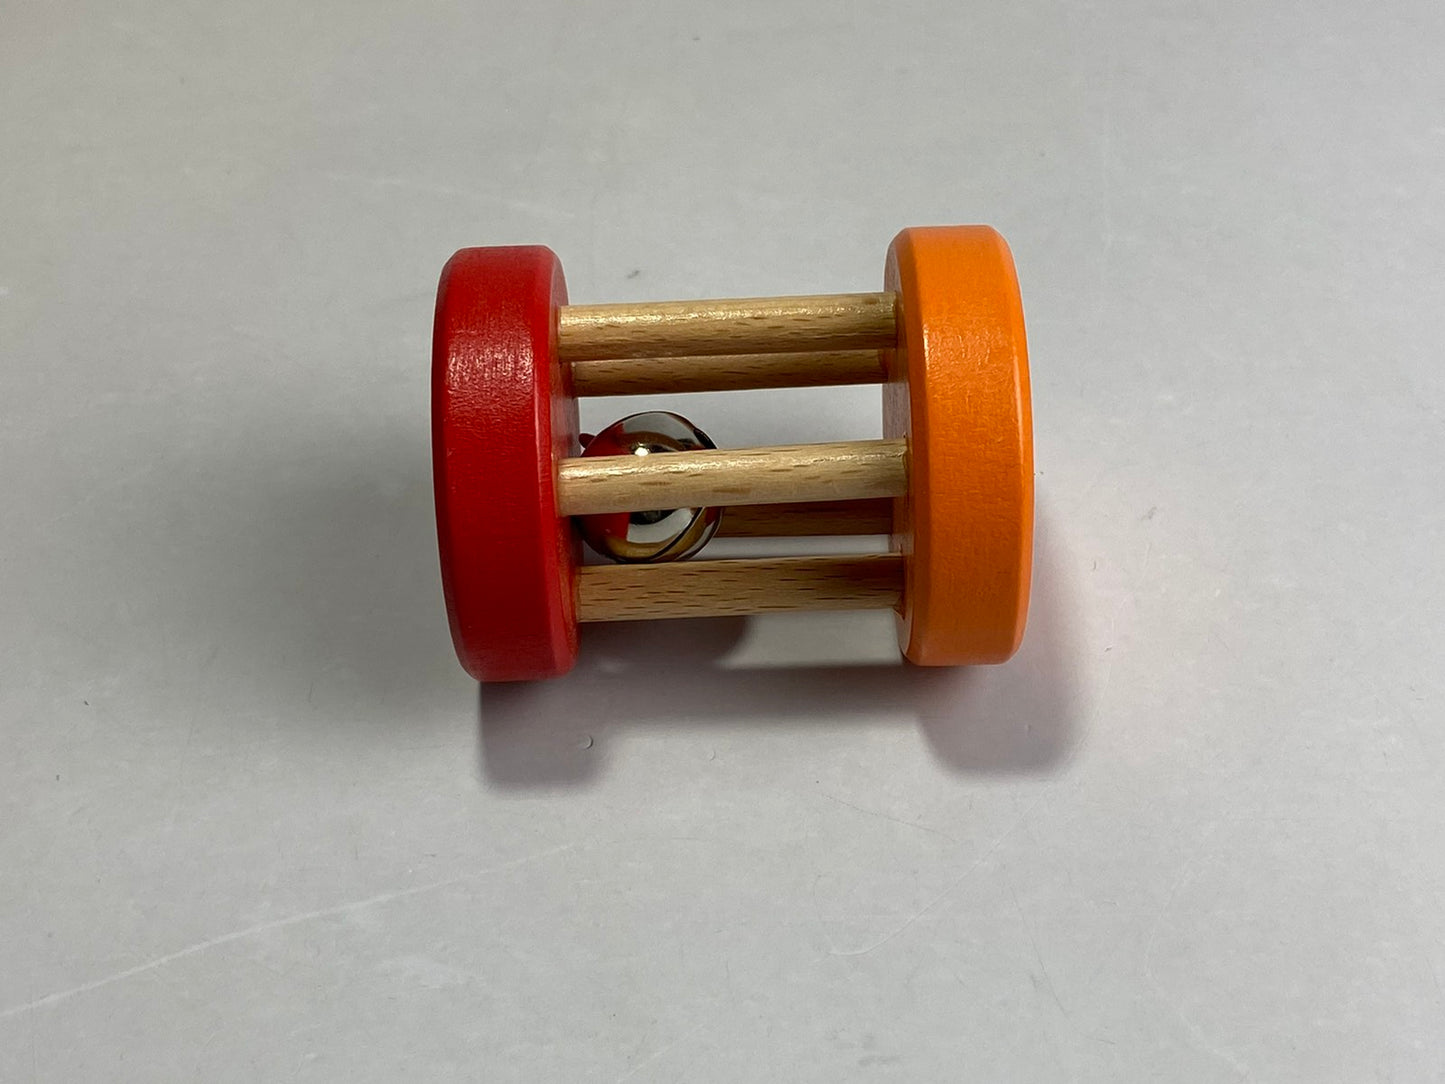 Wooden Rolling Rattle Bell Toy